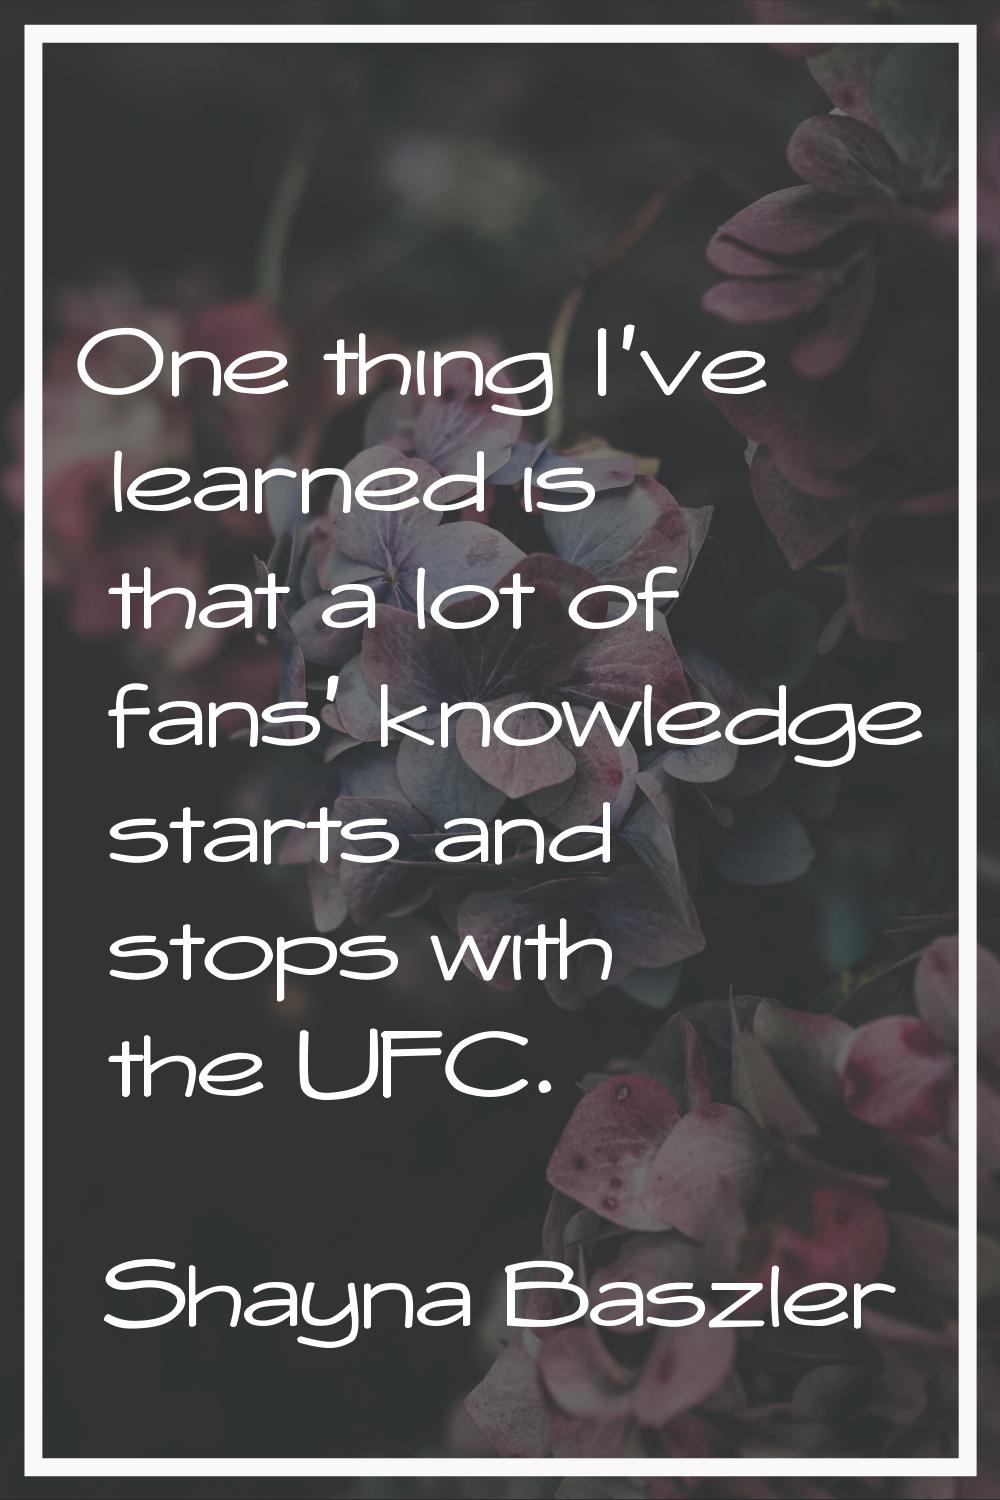 One thing I've learned is that a lot of fans' knowledge starts and stops with the UFC.